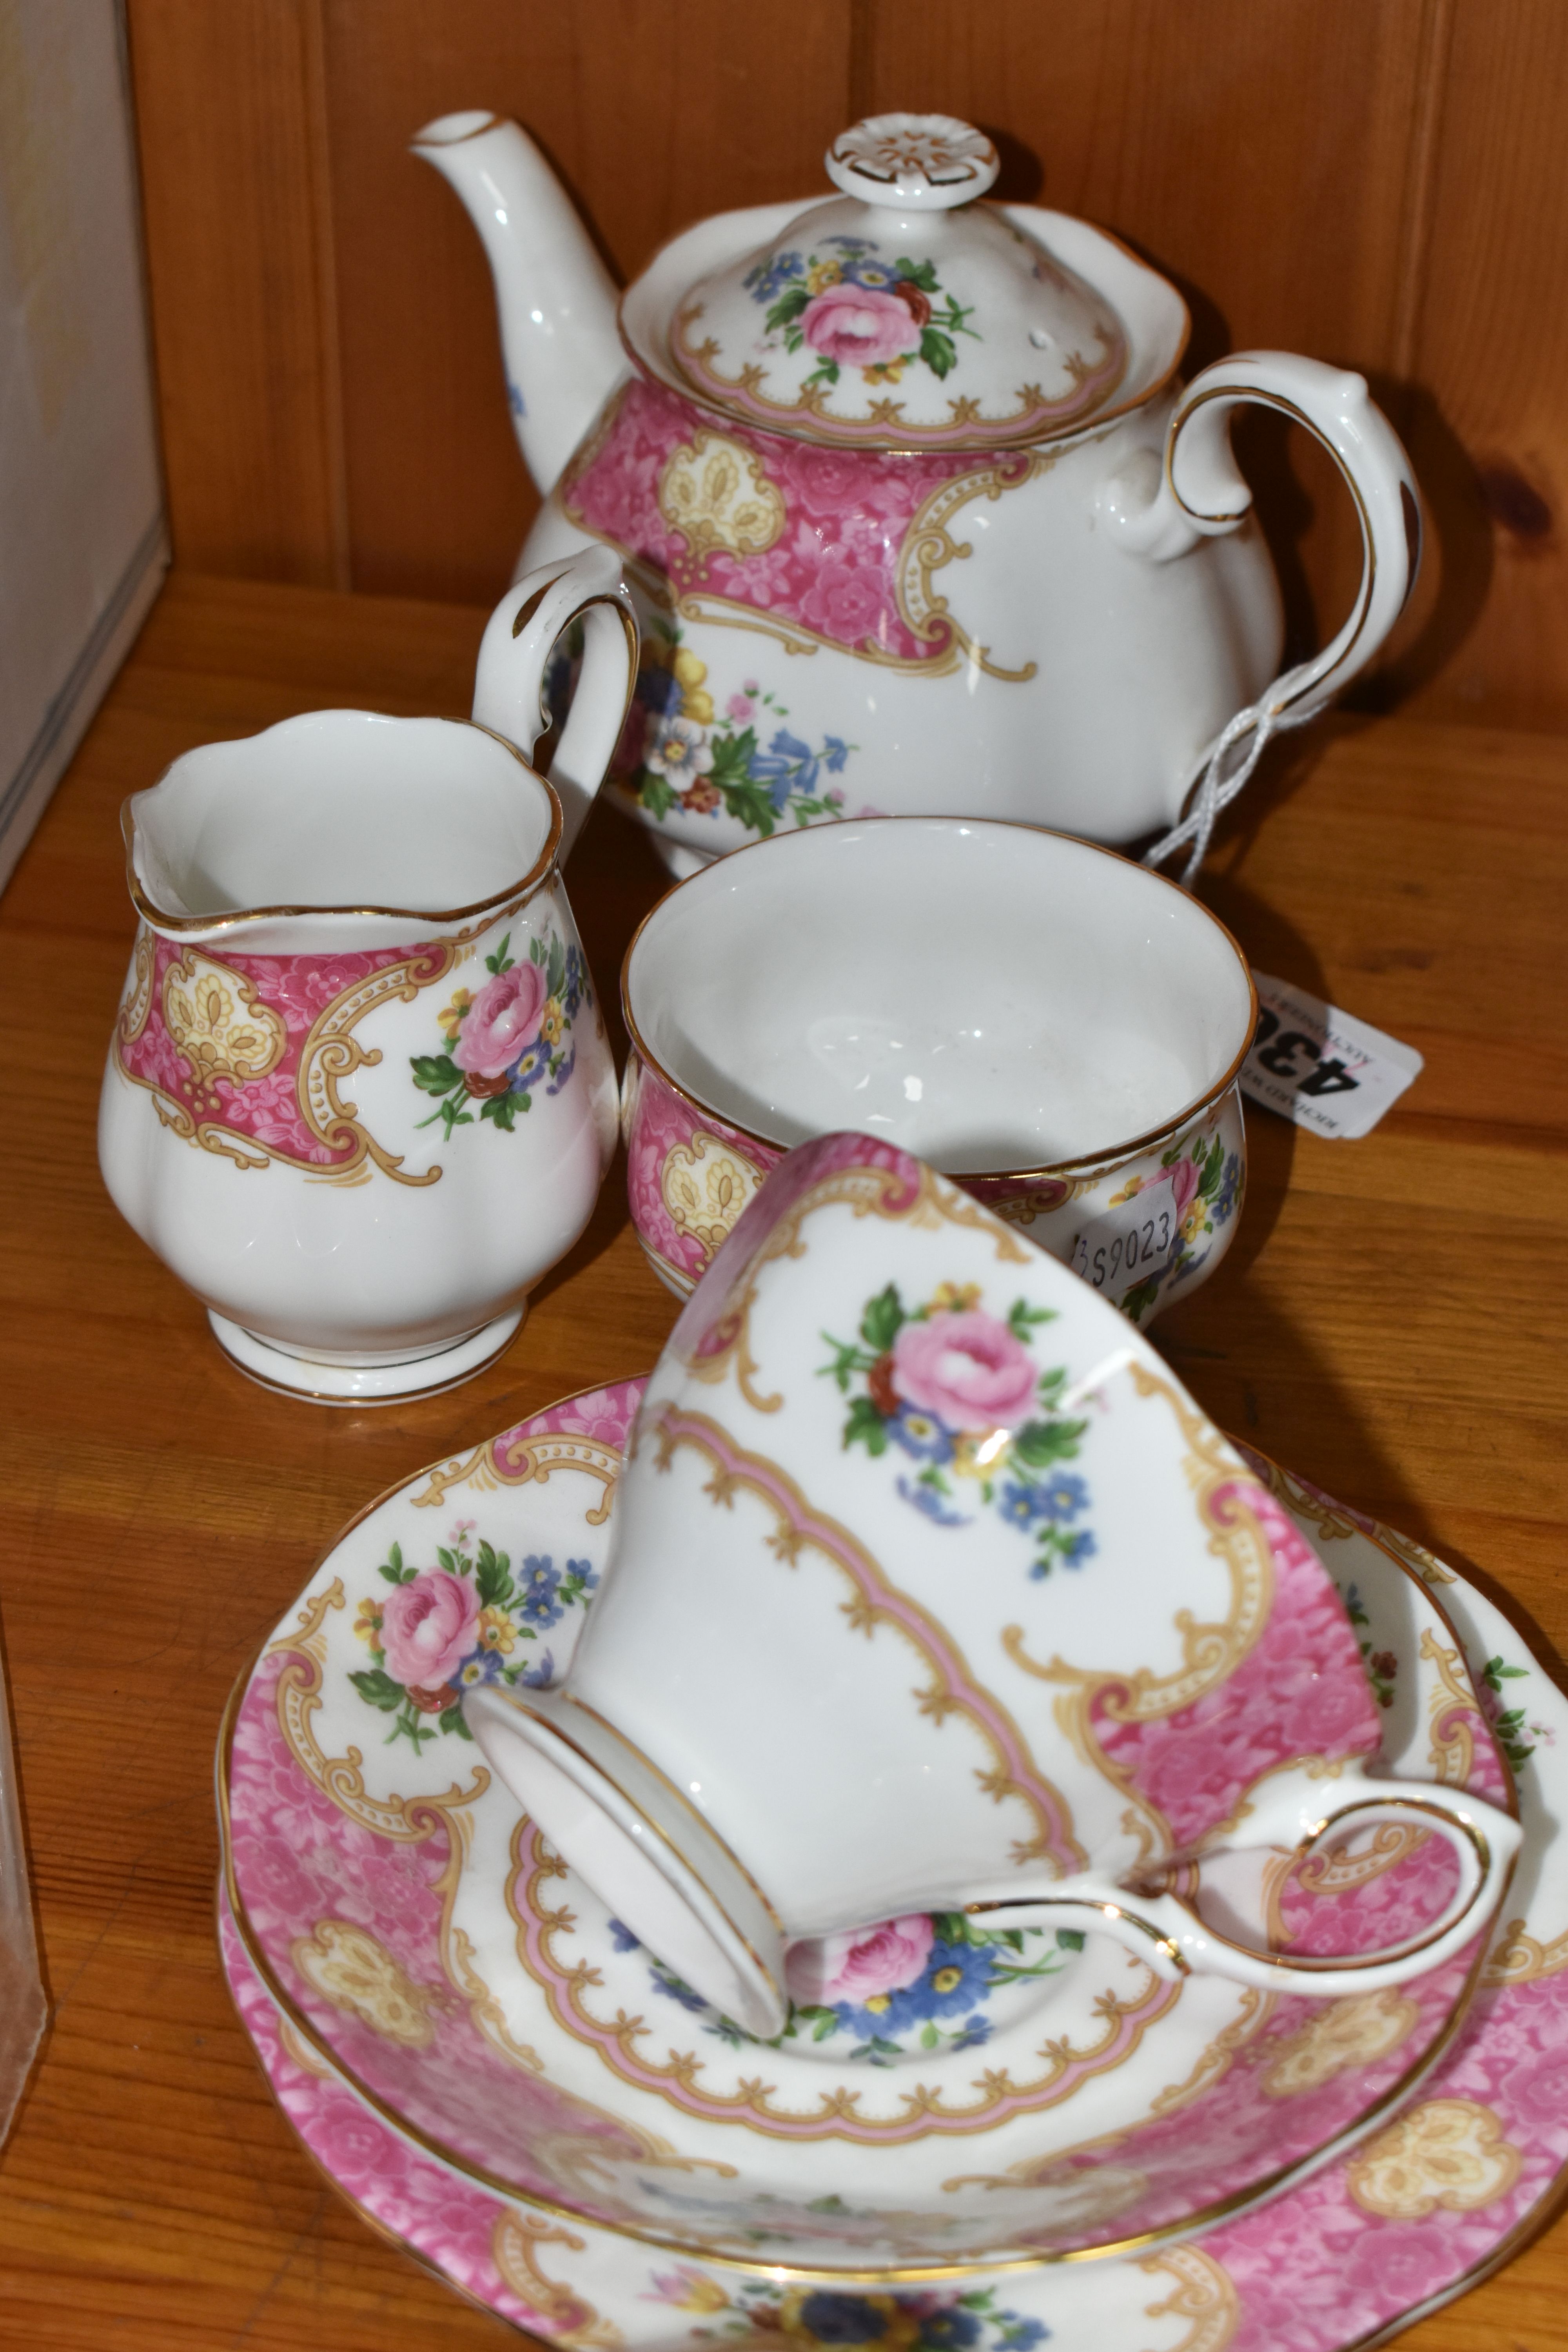 A ROYAL ALBERT 'LADY CARLYLE' PATTERN TEA SET FOR TWO, comprising a small teapot, milk jug, sugar